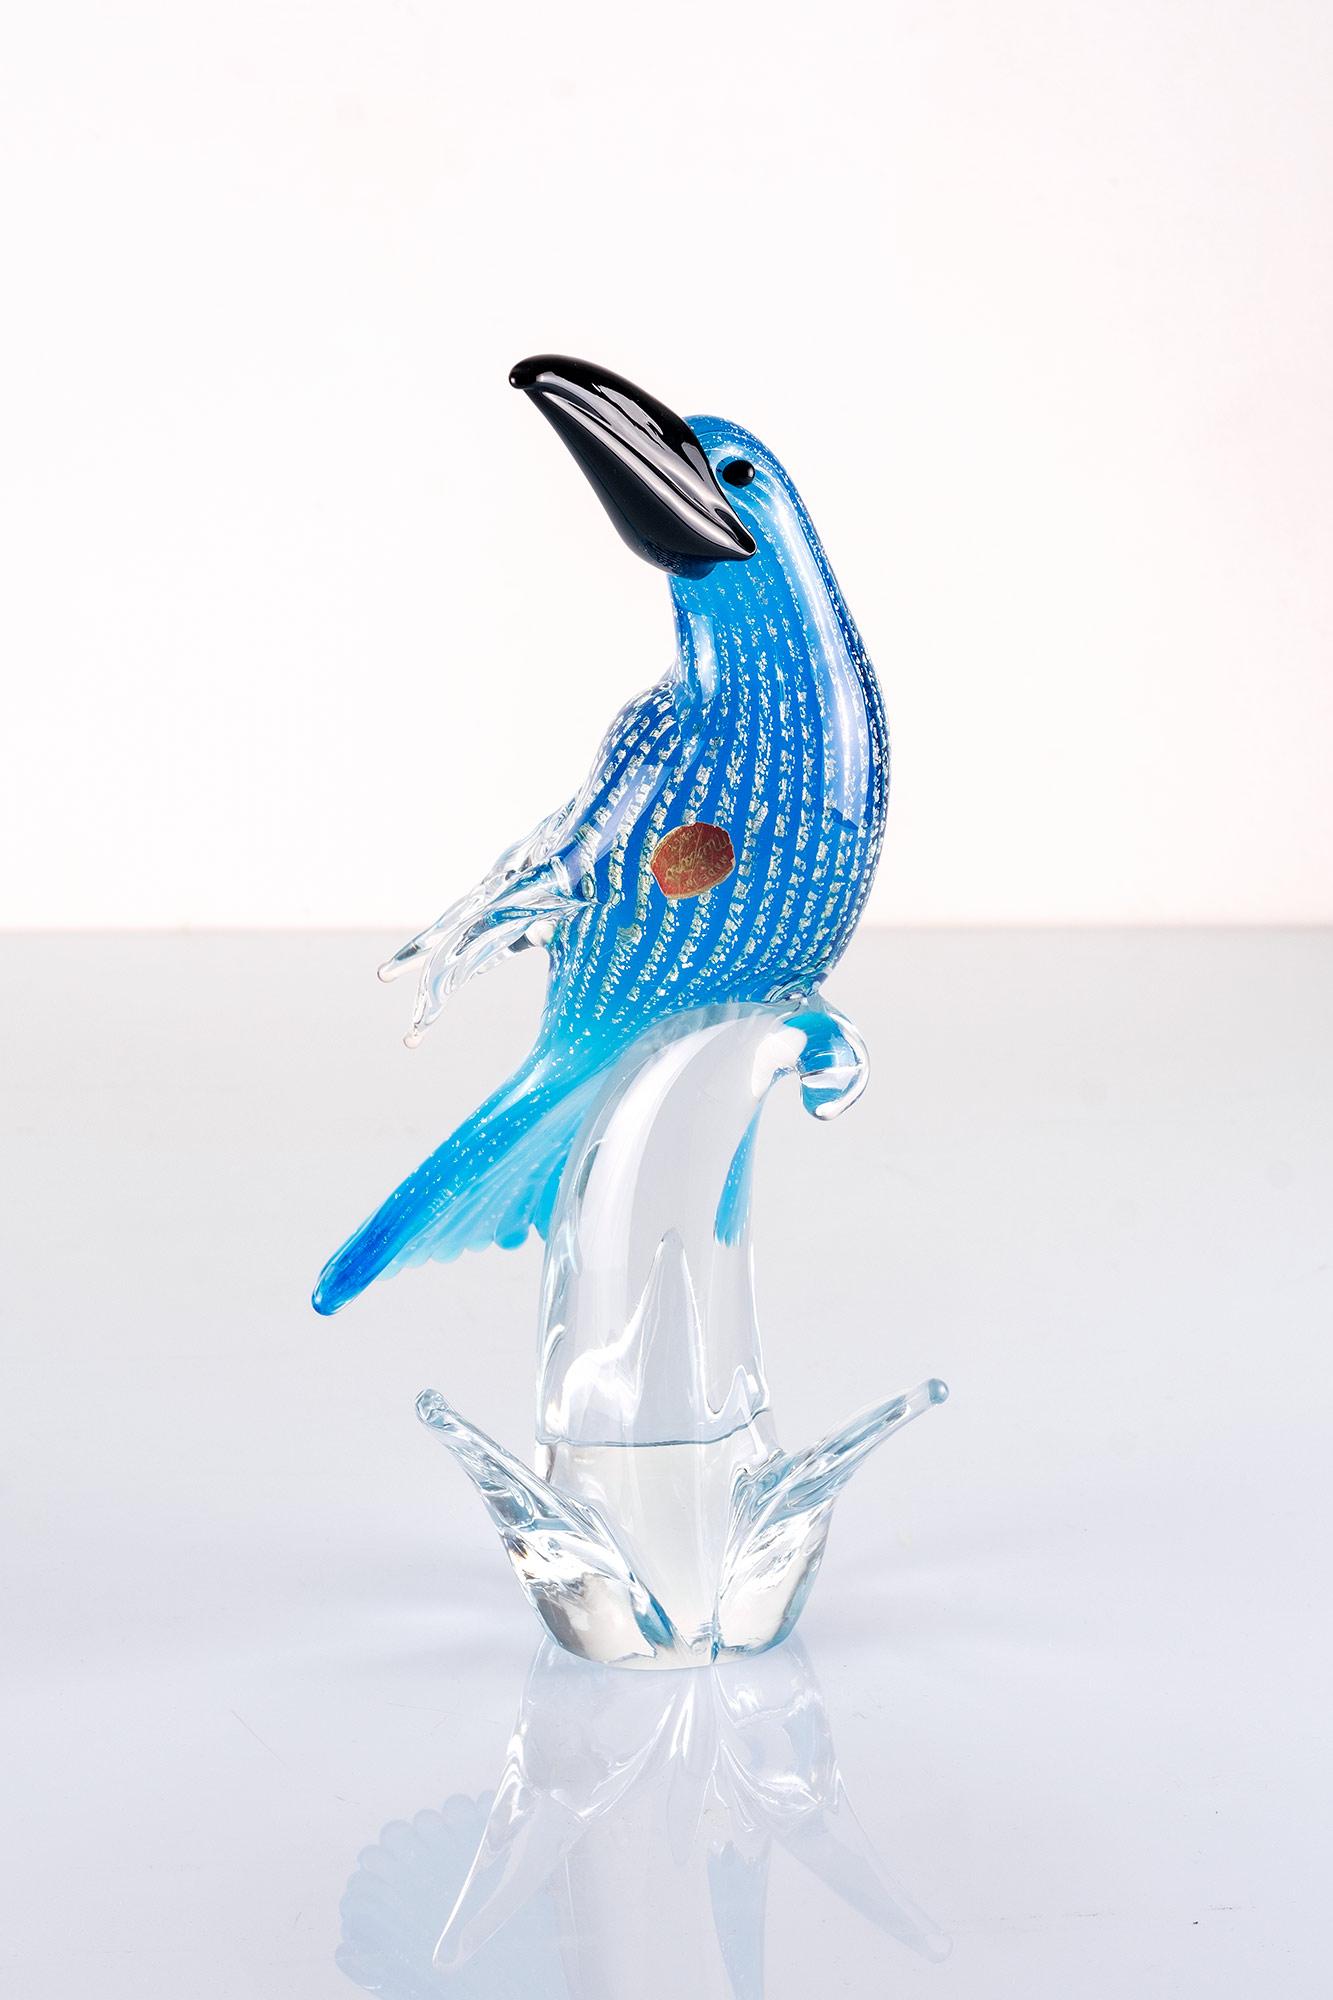 Splendid Murano glass sculpture of a bird by Formia, Murano. 
Silver avventurine and crystal glass. 
Etched signature and original label. 
In perfect condition.